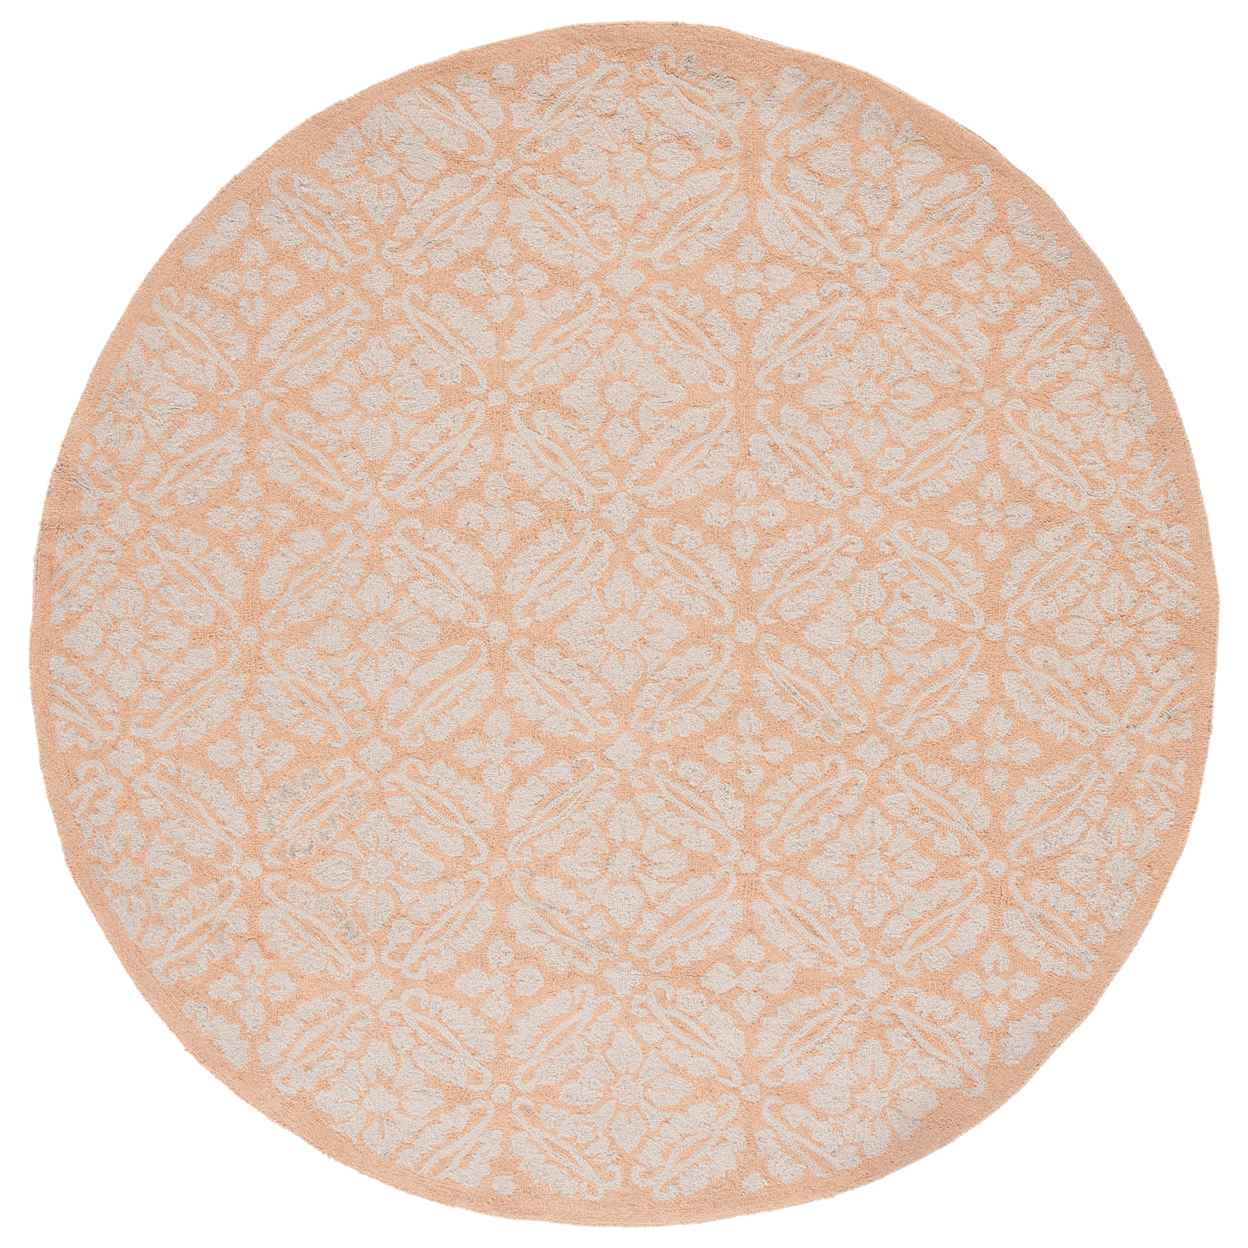 SAFAVIEH Chelsea Collection HK723C Hand-hooked Blush Rug - 8' Round